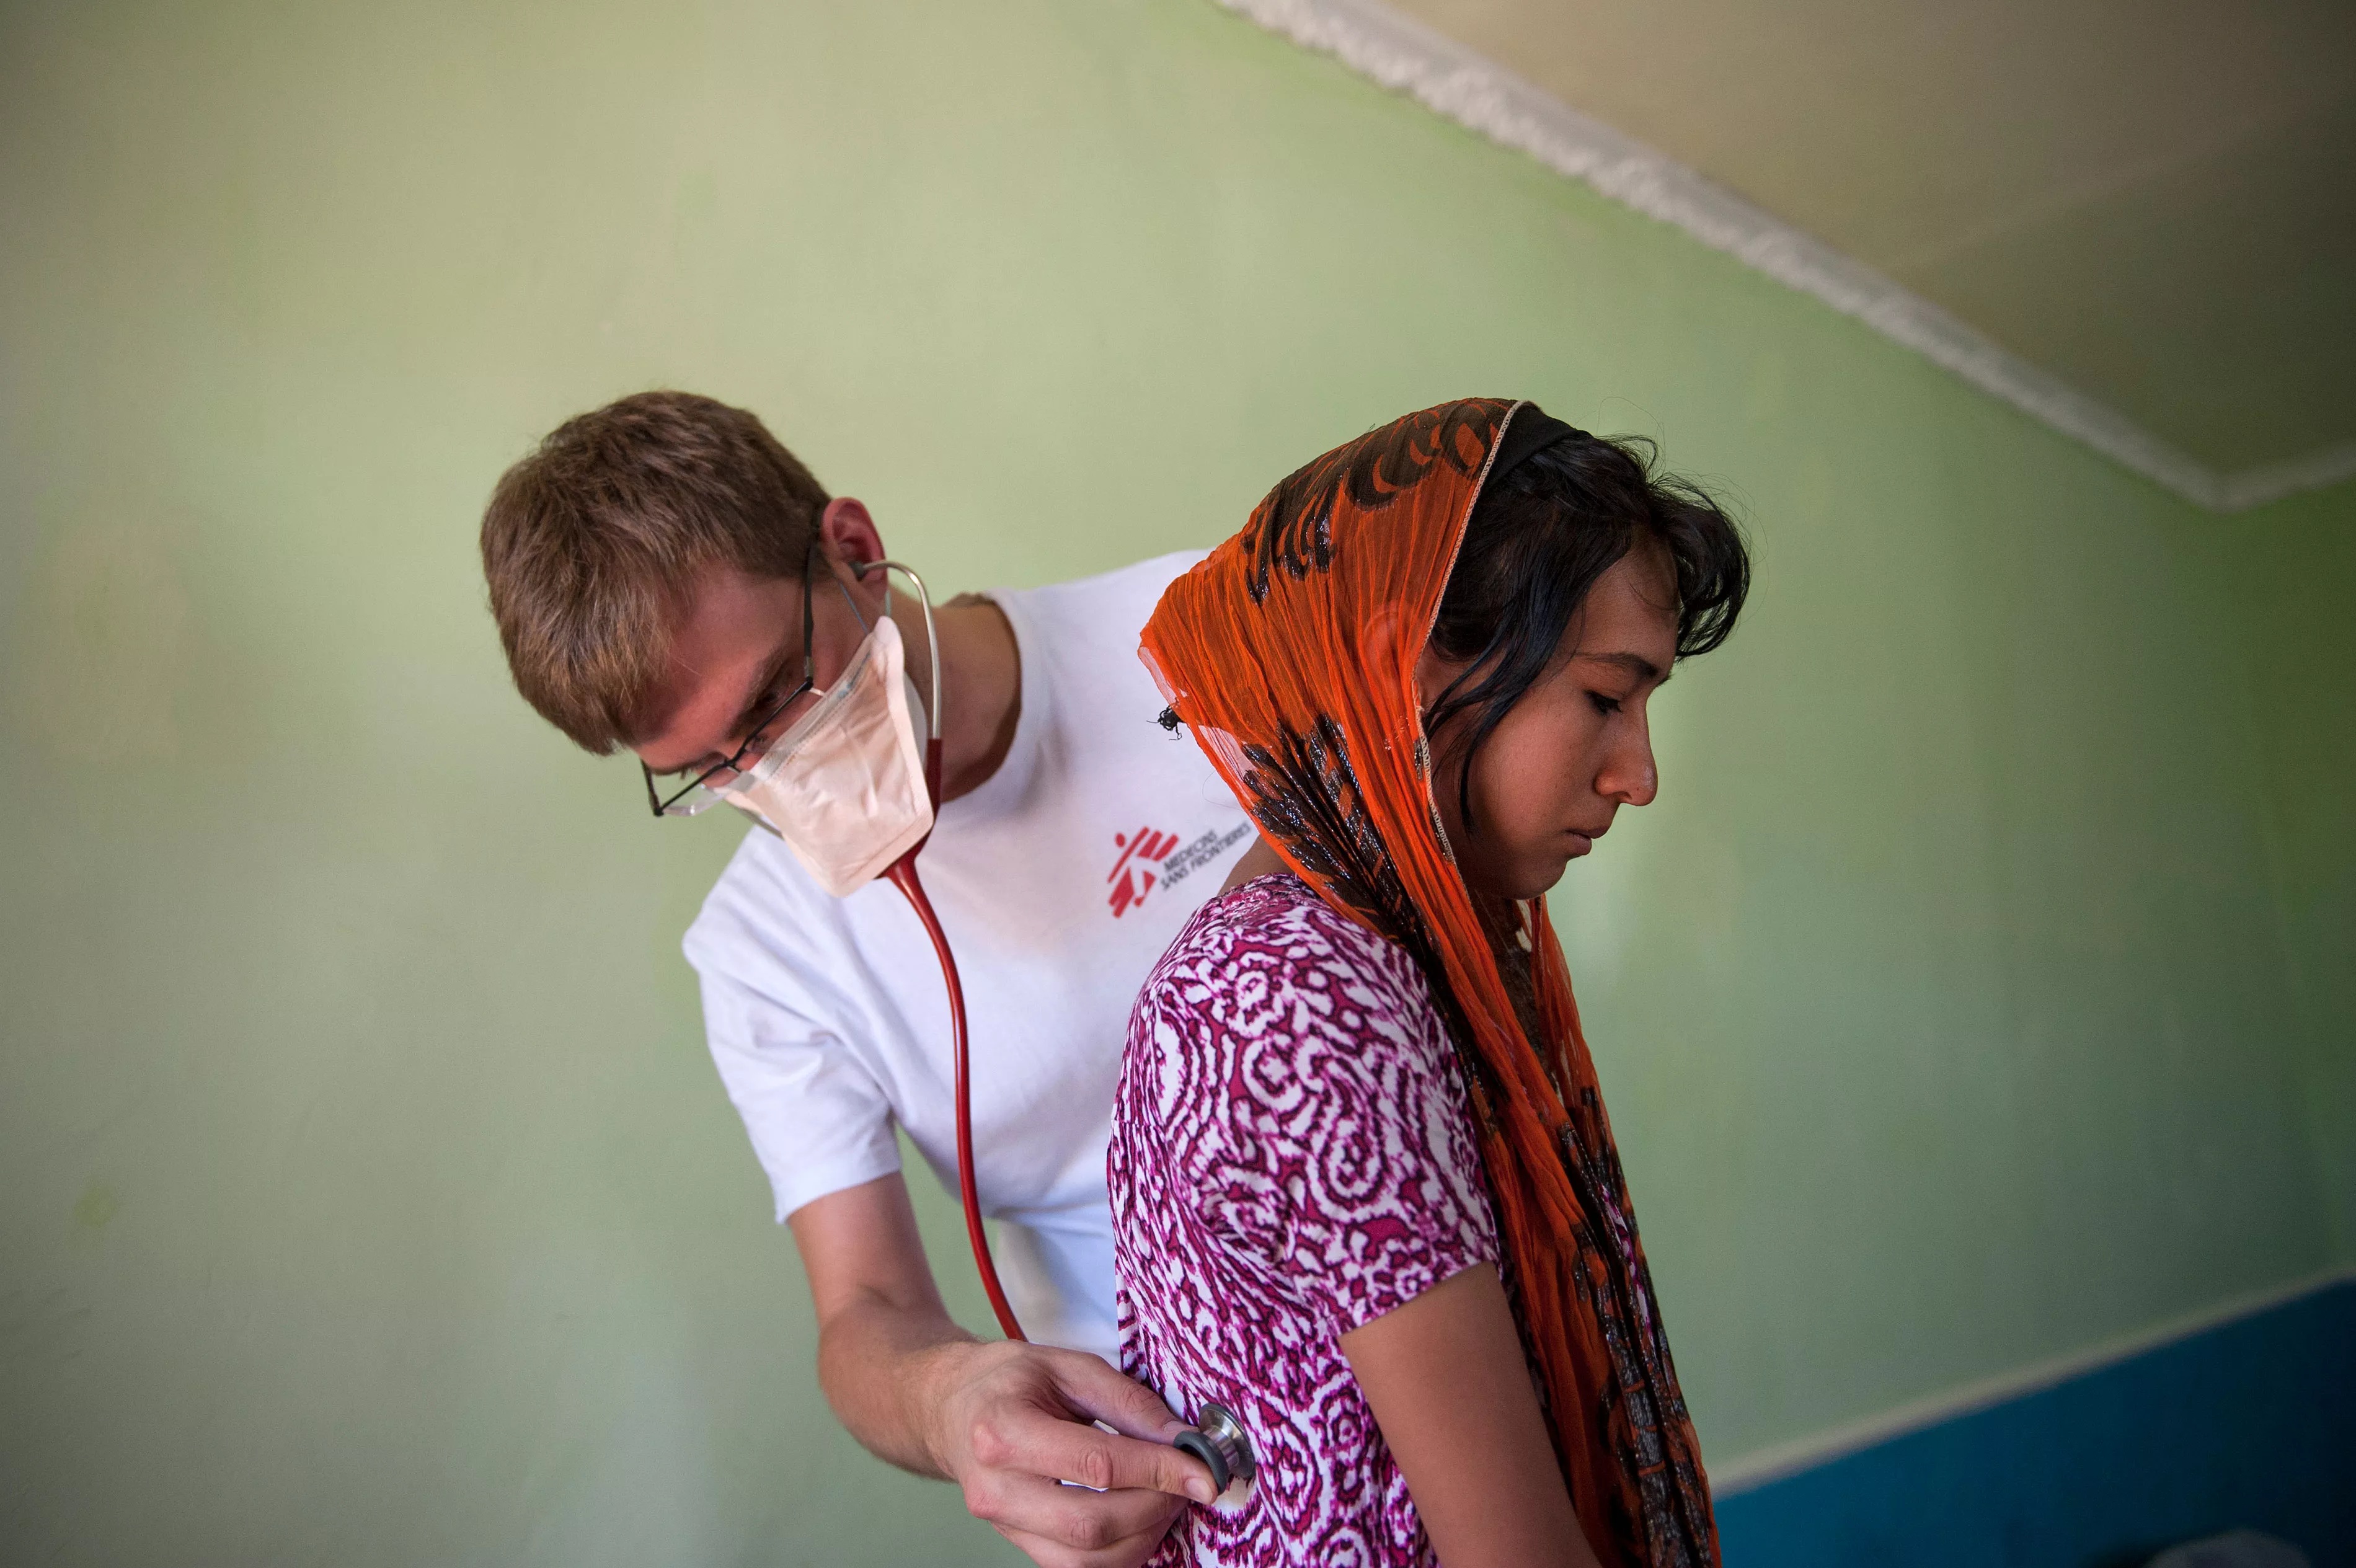 MSF doctor Christoph Höhn examines 16 year-old-Shahnoza in her family home. Shahnoza started MDR-TB treatment in October 2012 but was later diagnosed with XDR-TB. Since January 2013, she is on the right drug regimen, but she will need another 1,5 years of treatment.